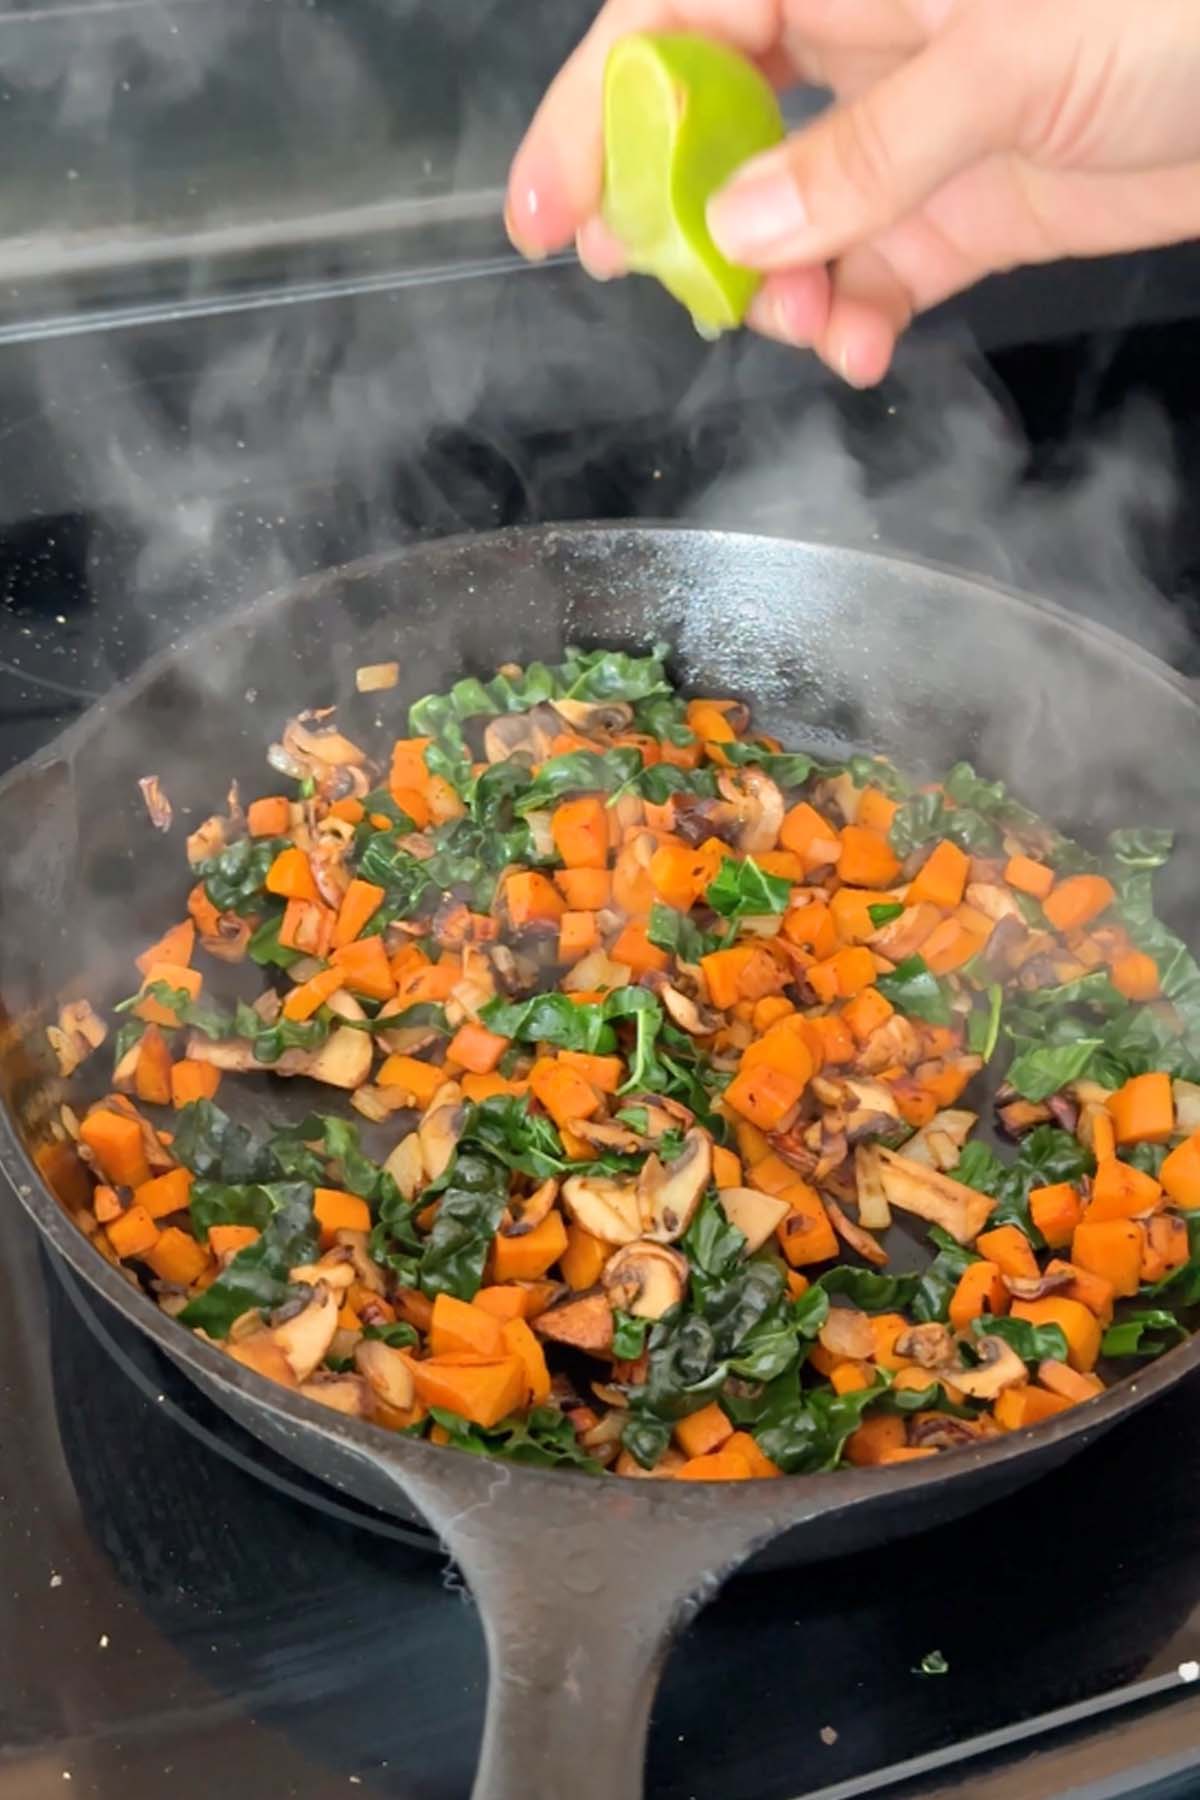 Lime juice squeezed onto cubed sweet potato, kale, and sliced mushrooms in a cast iron skillet.